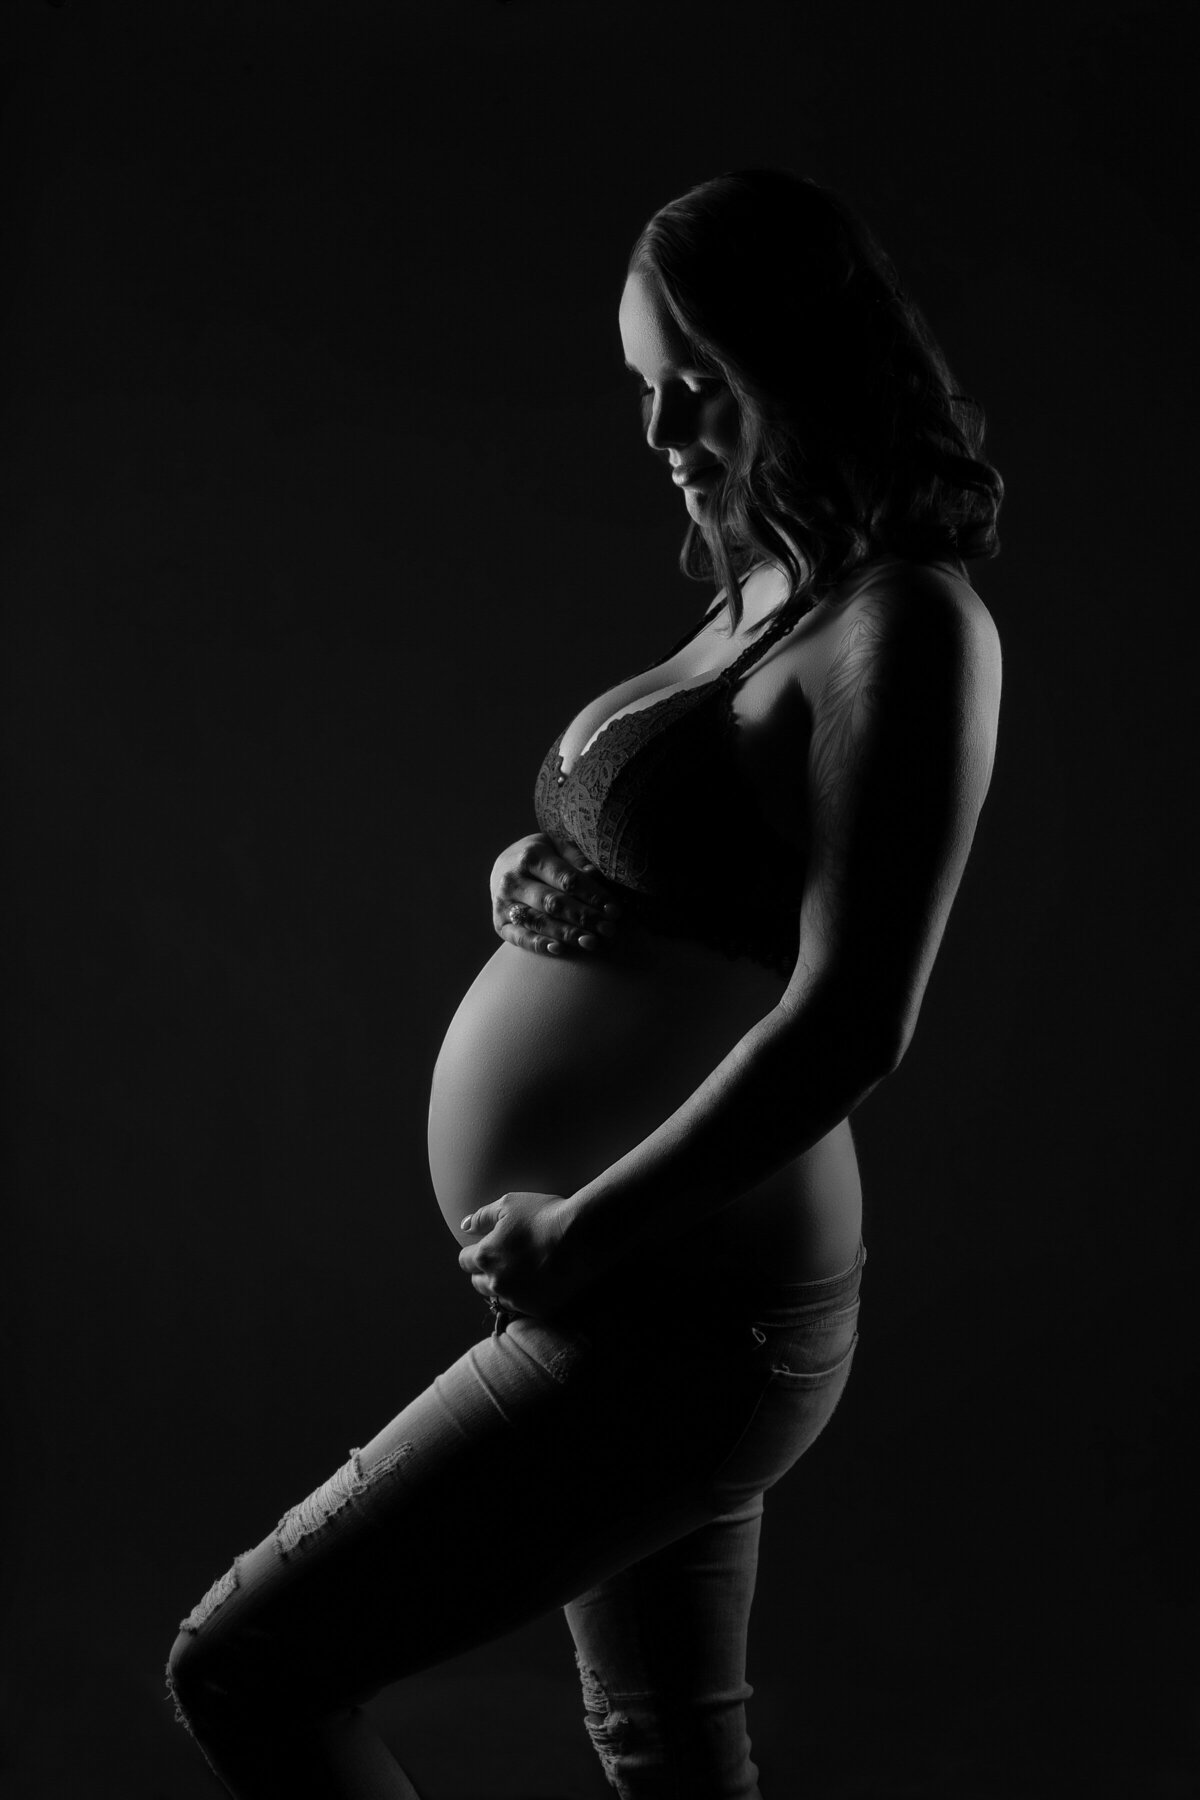 In BW Raleigh NC Maternity Portrait Photographer 1